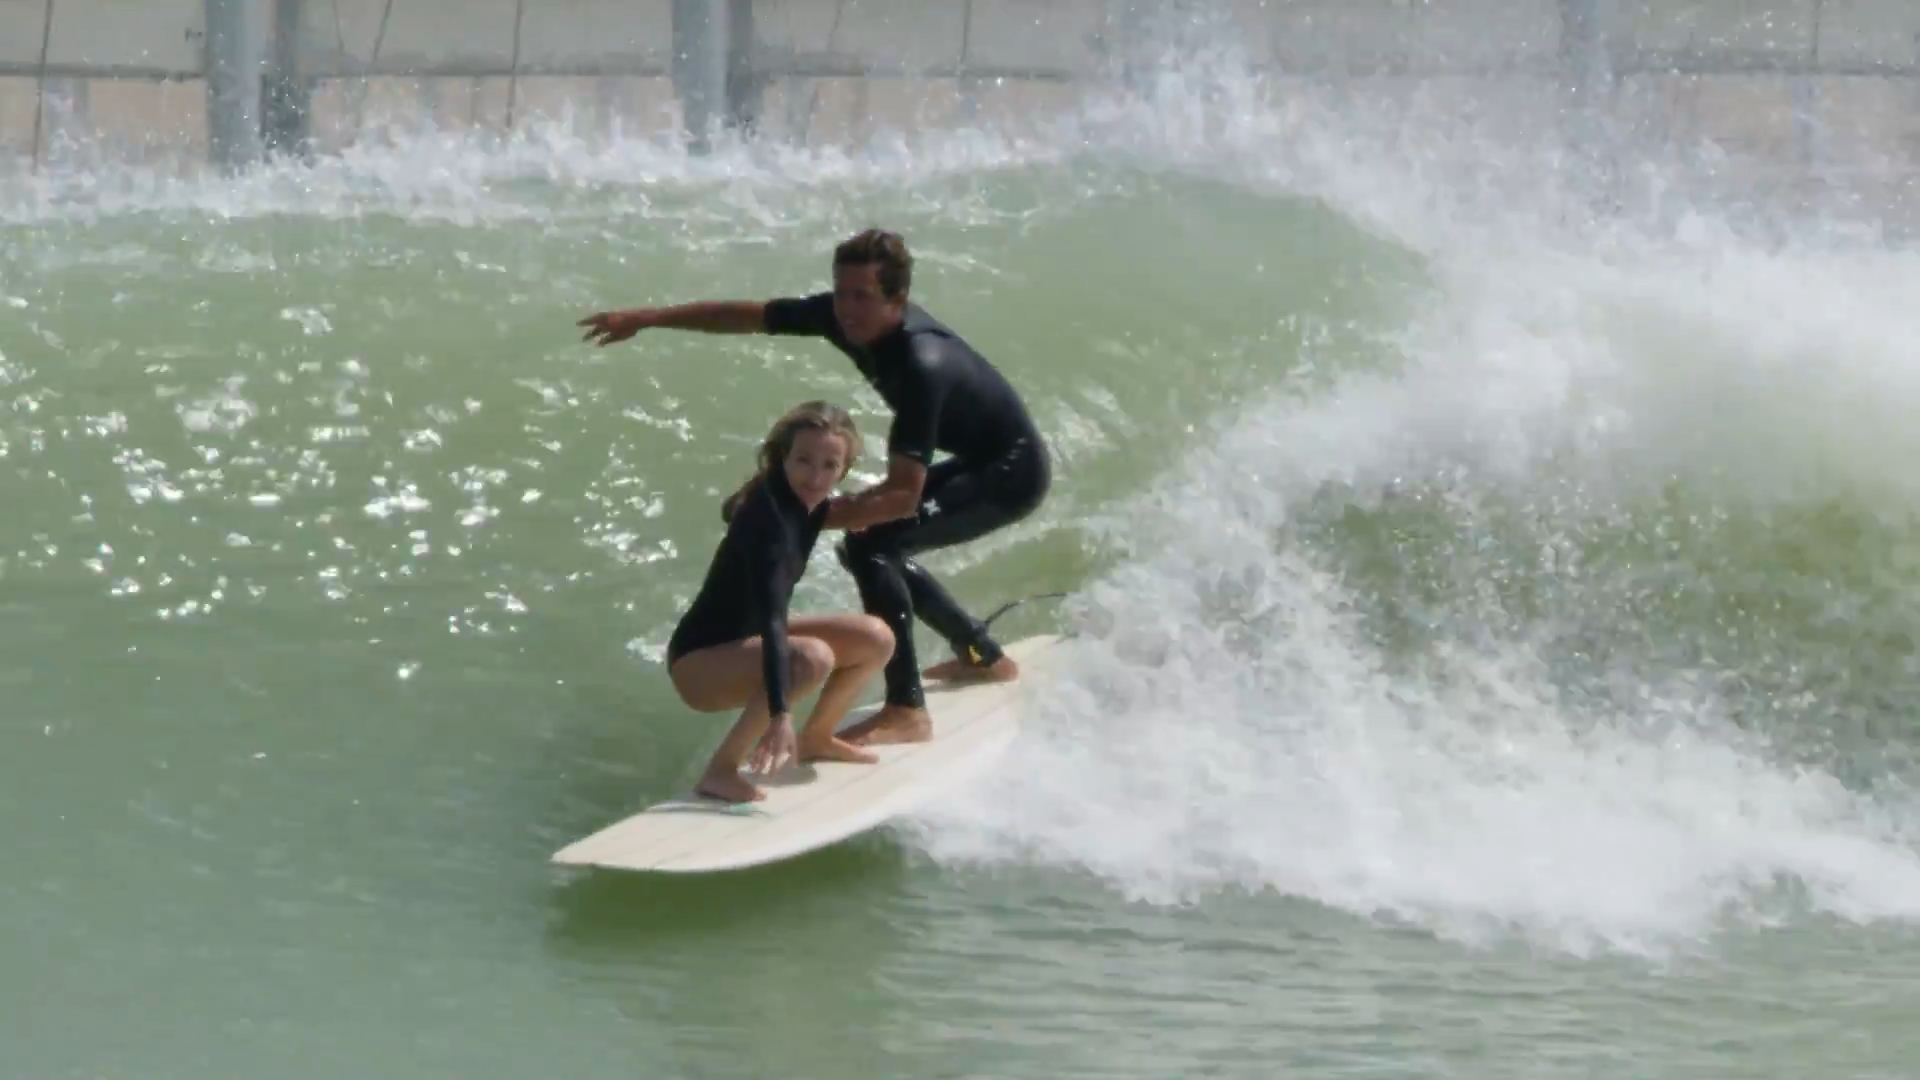 Tandem Surfing at the Kelly Slater Surf Ranch